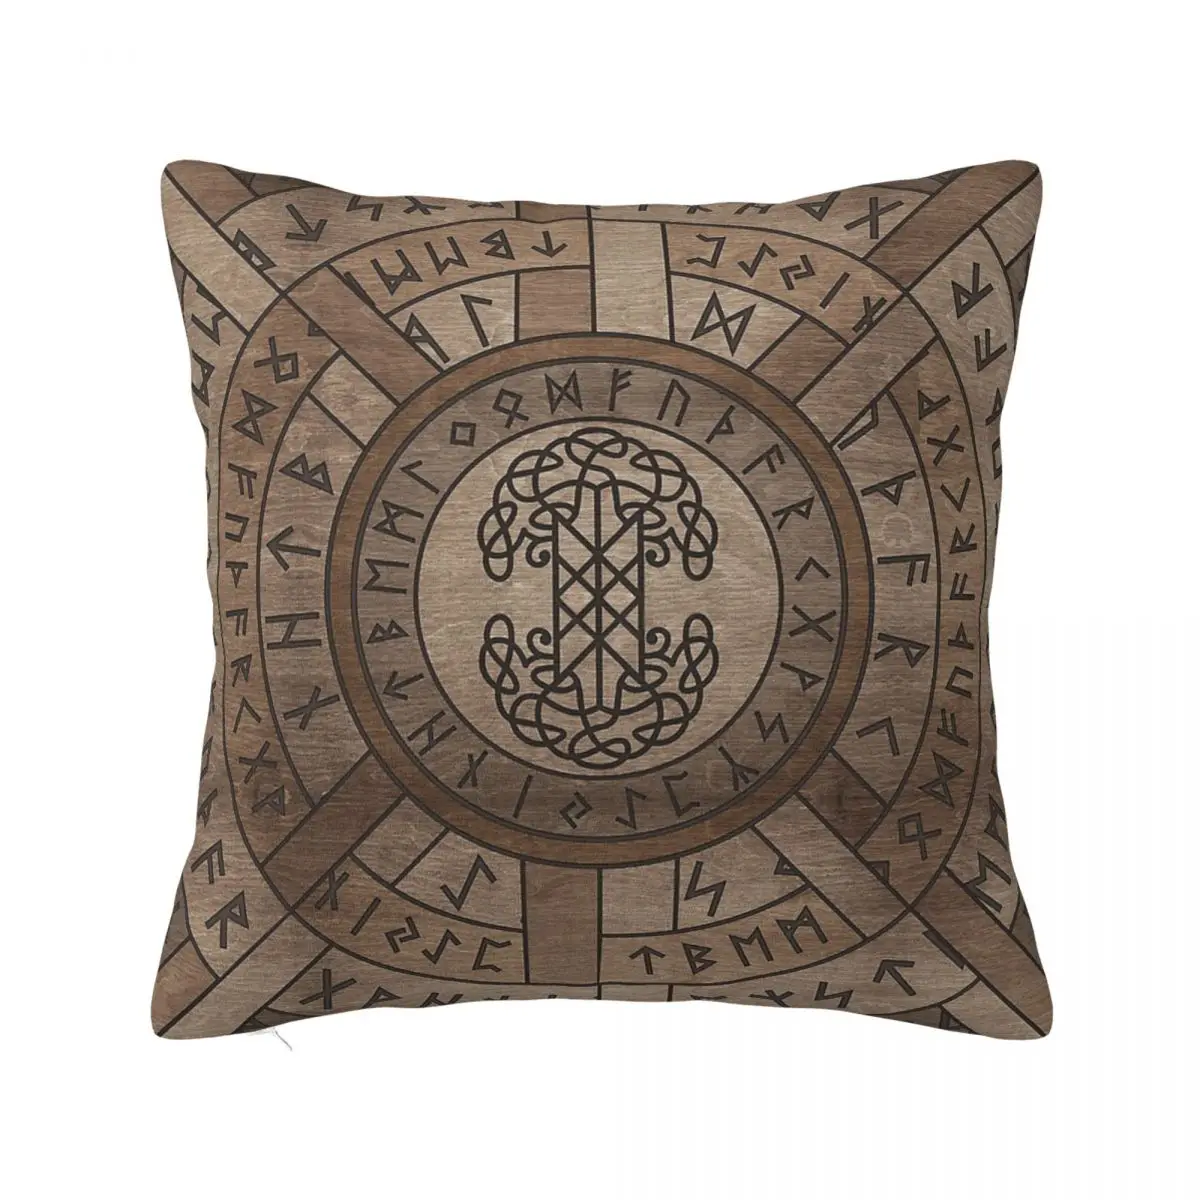 Web Of Wyrd The Matrix Of Fate And Tree Of Life vikings runes Cushion Cover Gift PillowCase Cover for Home Double-sided Printed